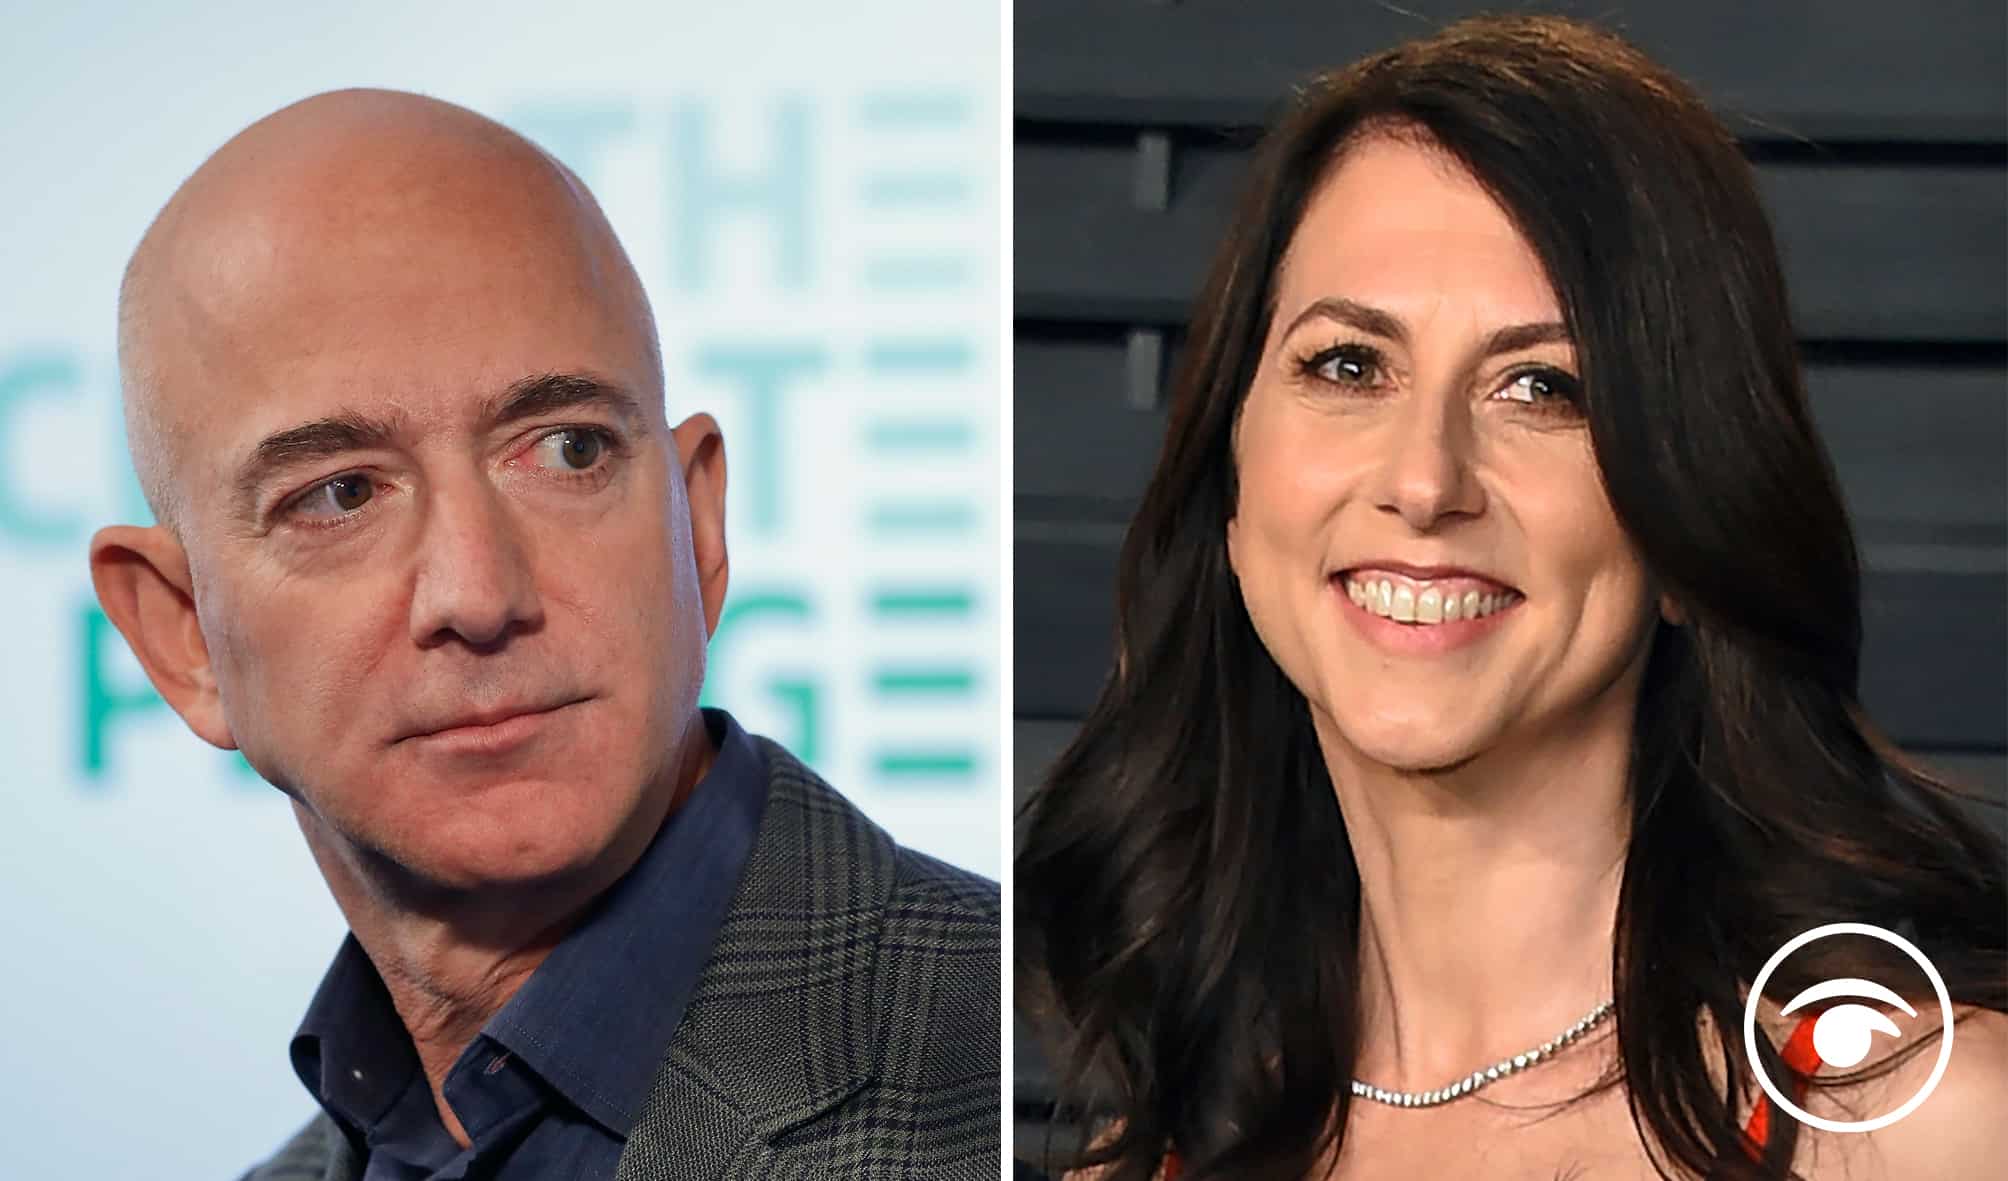 Jeff Bezos’ ex-wife MacKenzie Scott gives $4.1bn to charity in four months as he made $72bn during pandemic